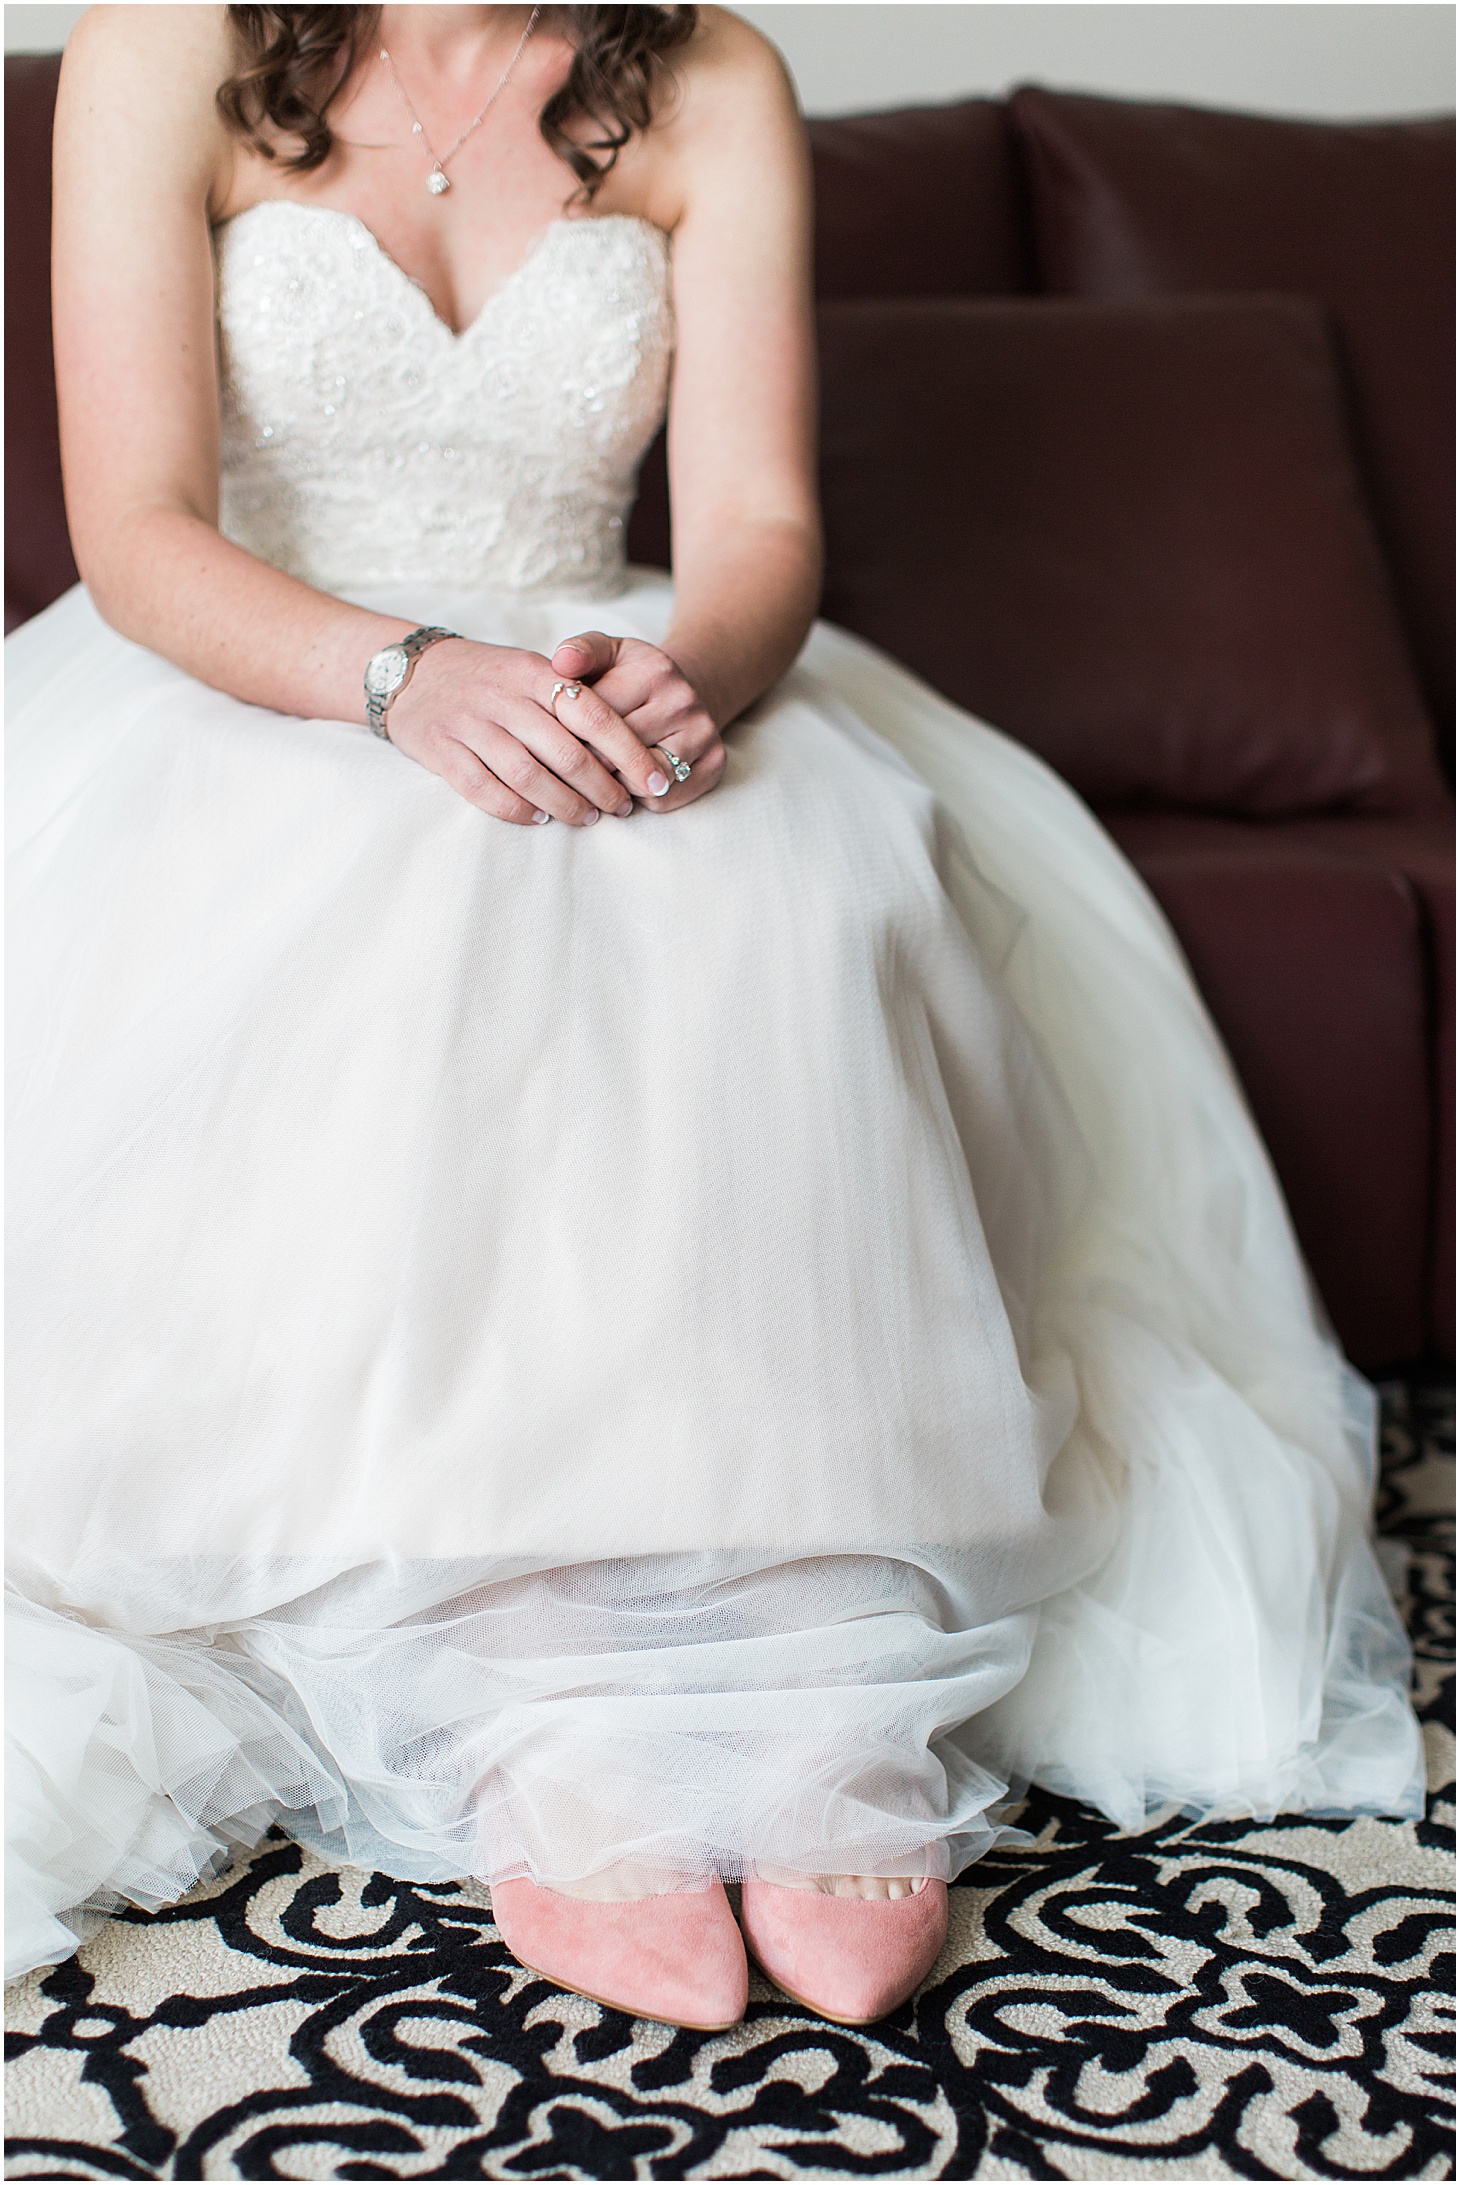 Bride Getting Ready at Kimpton Donovan Hotel, Dusty Blue and Pink Jewish Wedding at Women in the Arts, Sarah Bradshaw Photography, DC Wedding Photographer 